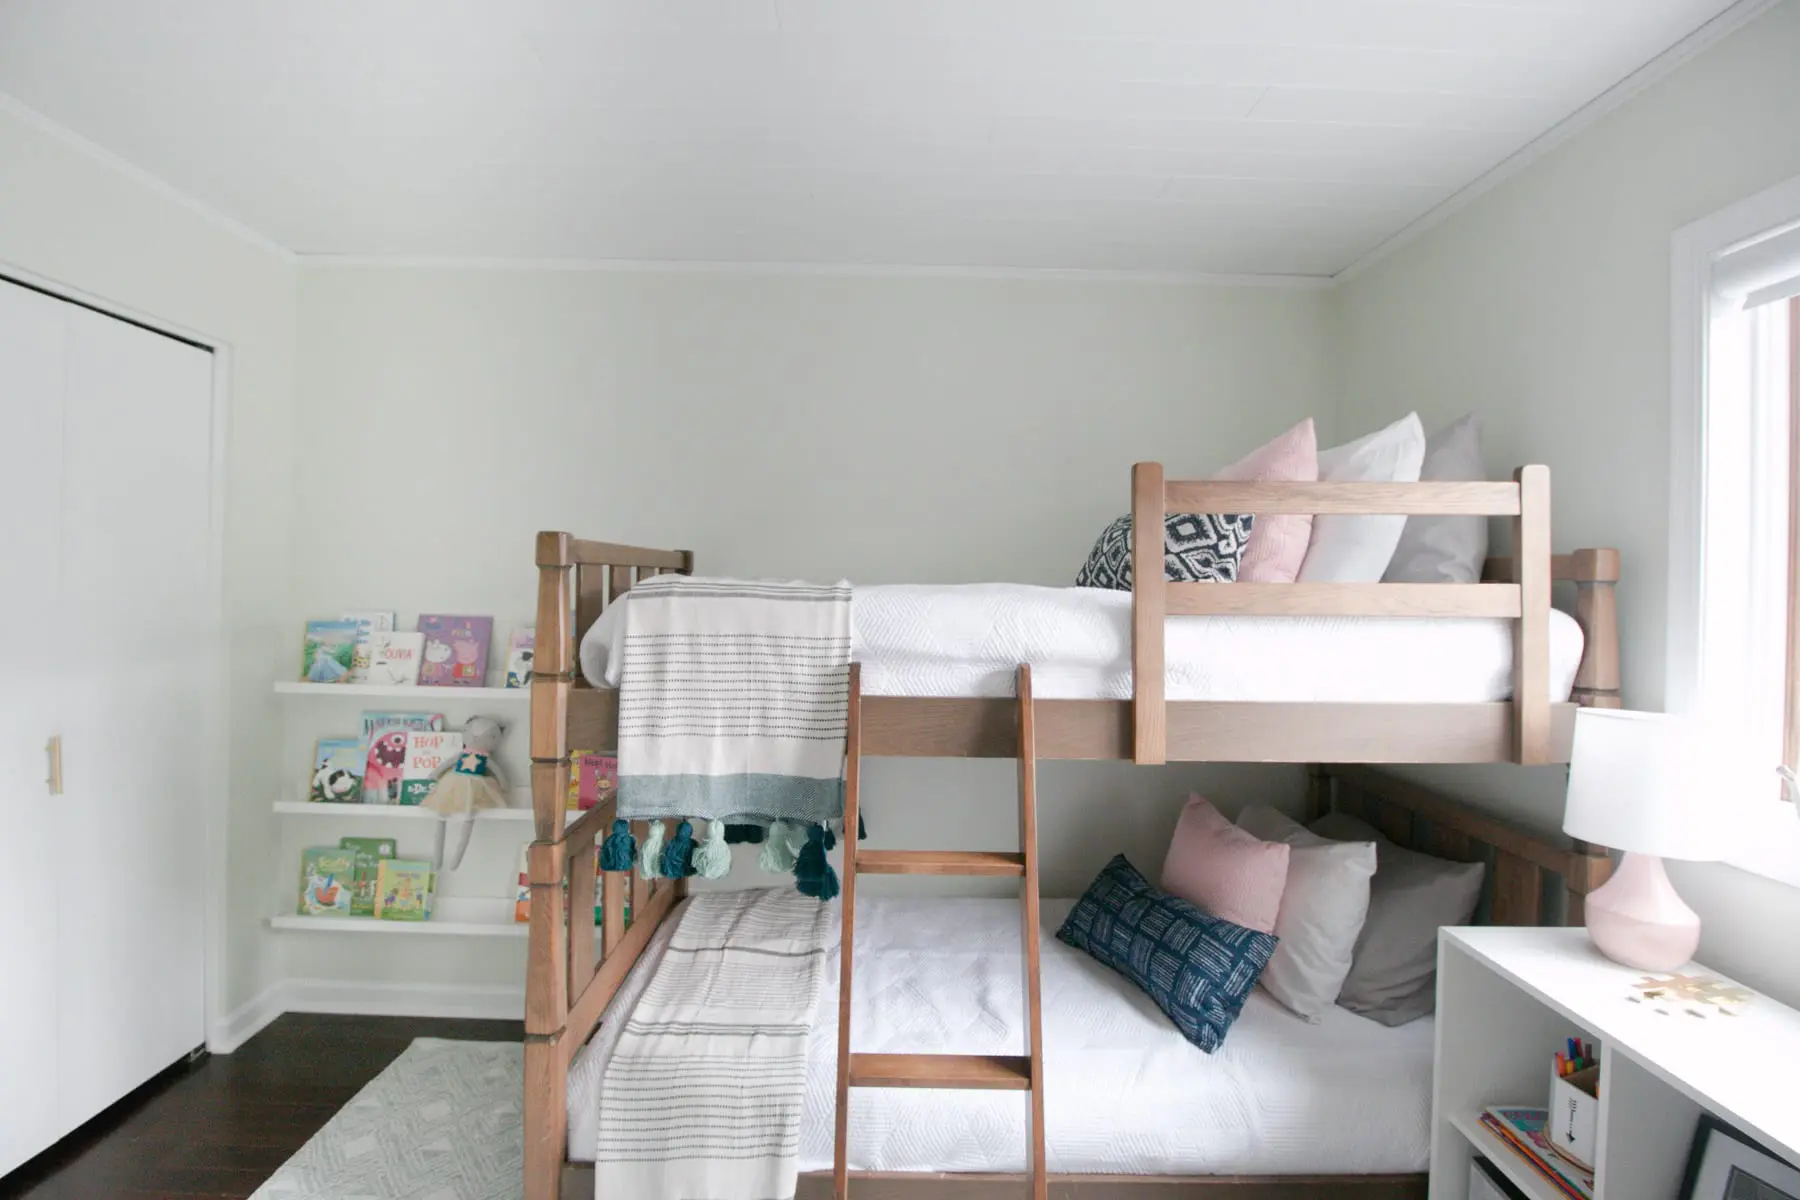 A kids' room makeover with the walls painted the color Sagey. 